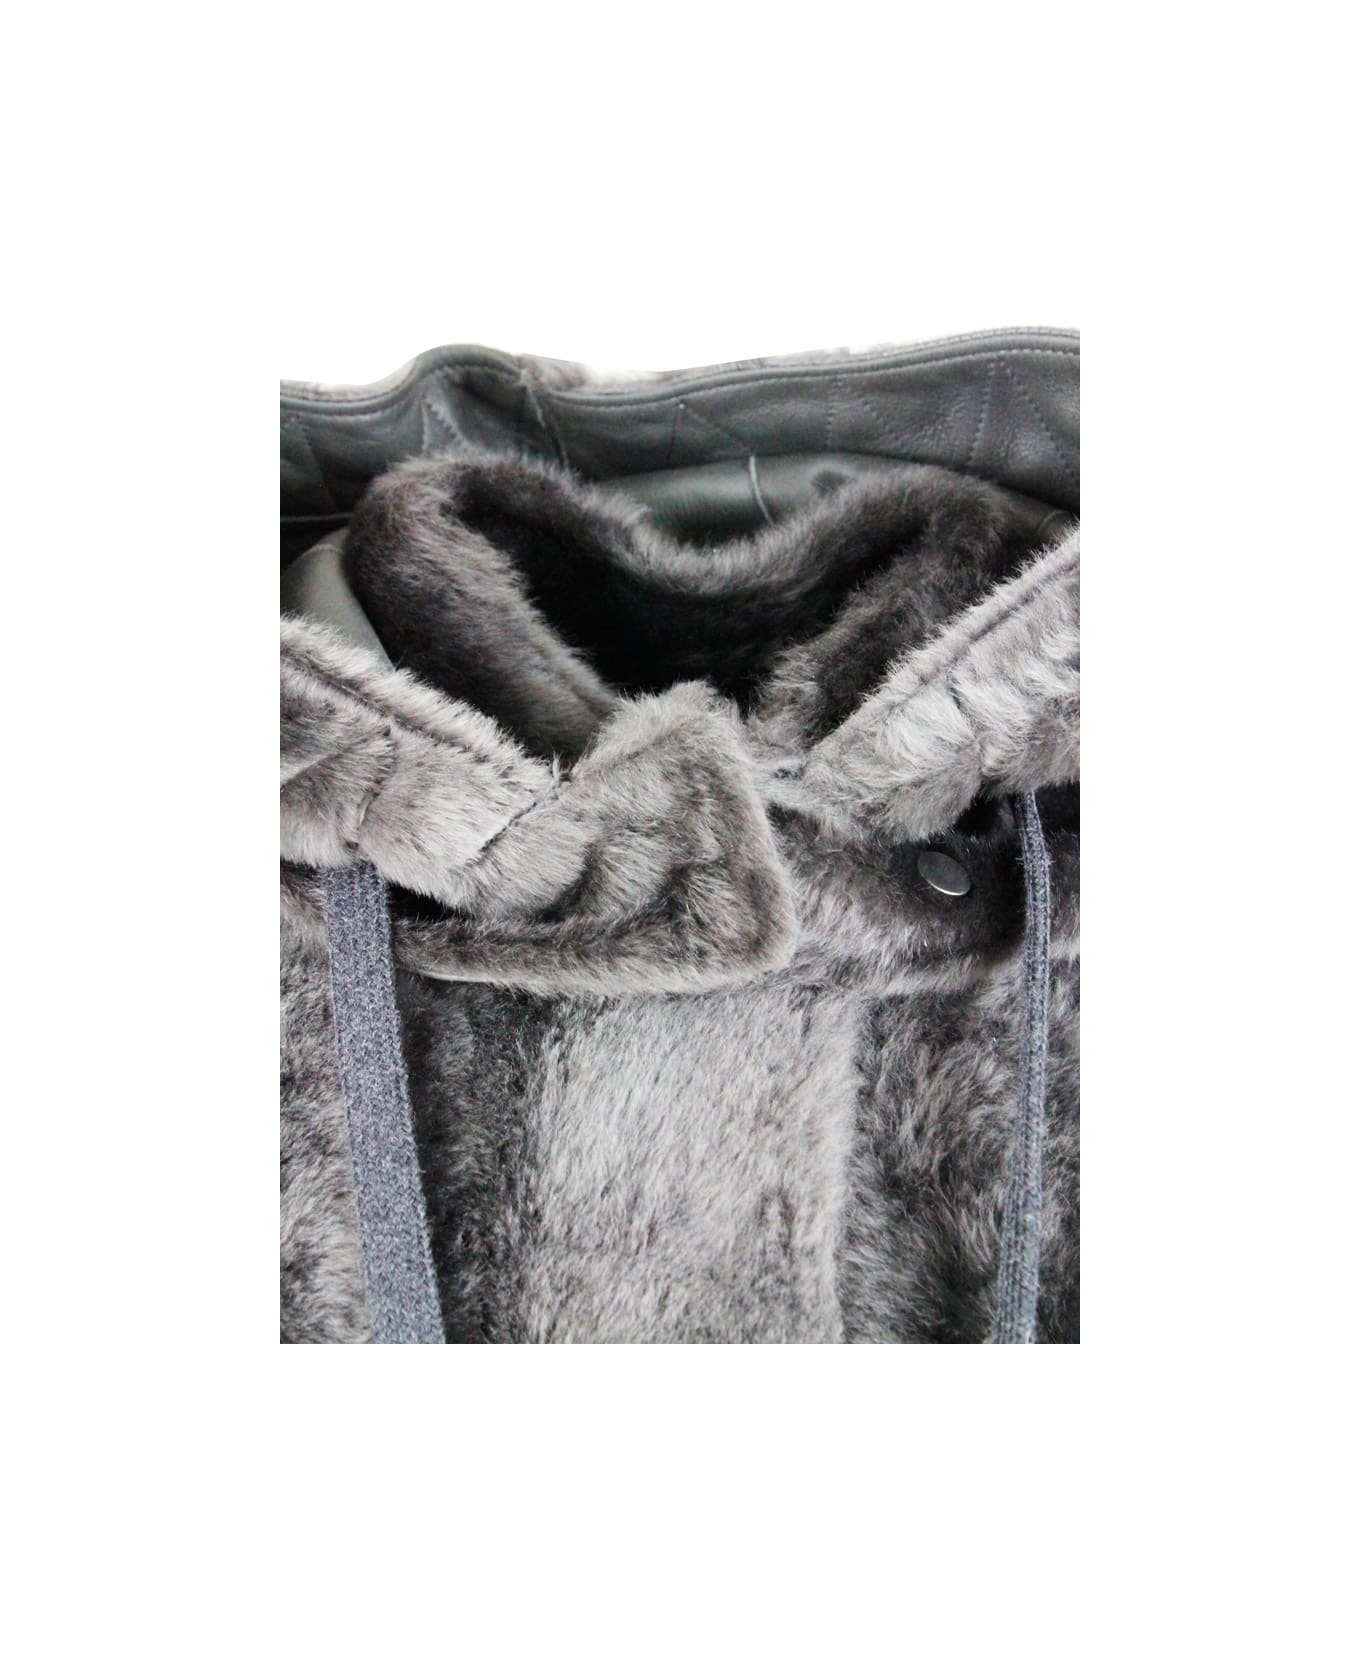 Brunello Cucinelli Long Shearling Coat With Detachable Hood And Monili Along The Zip Closure - Grey コート